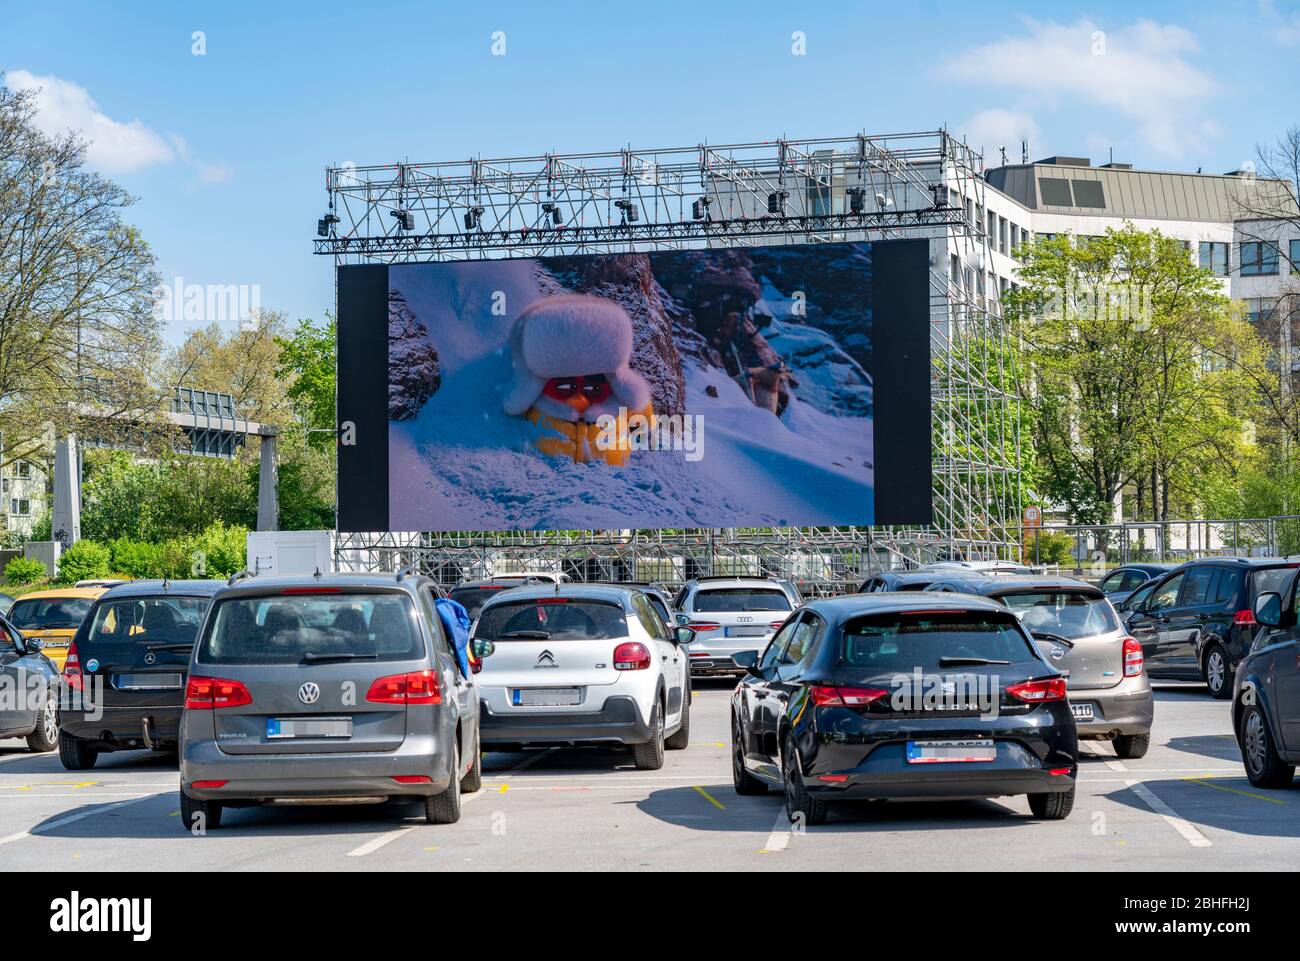 Temporary drive-in cinema, in the parking lot in front of Messe Essen, Grugahalle, large LED screen also allows film screenings in sunshine, family fi Stock Photo